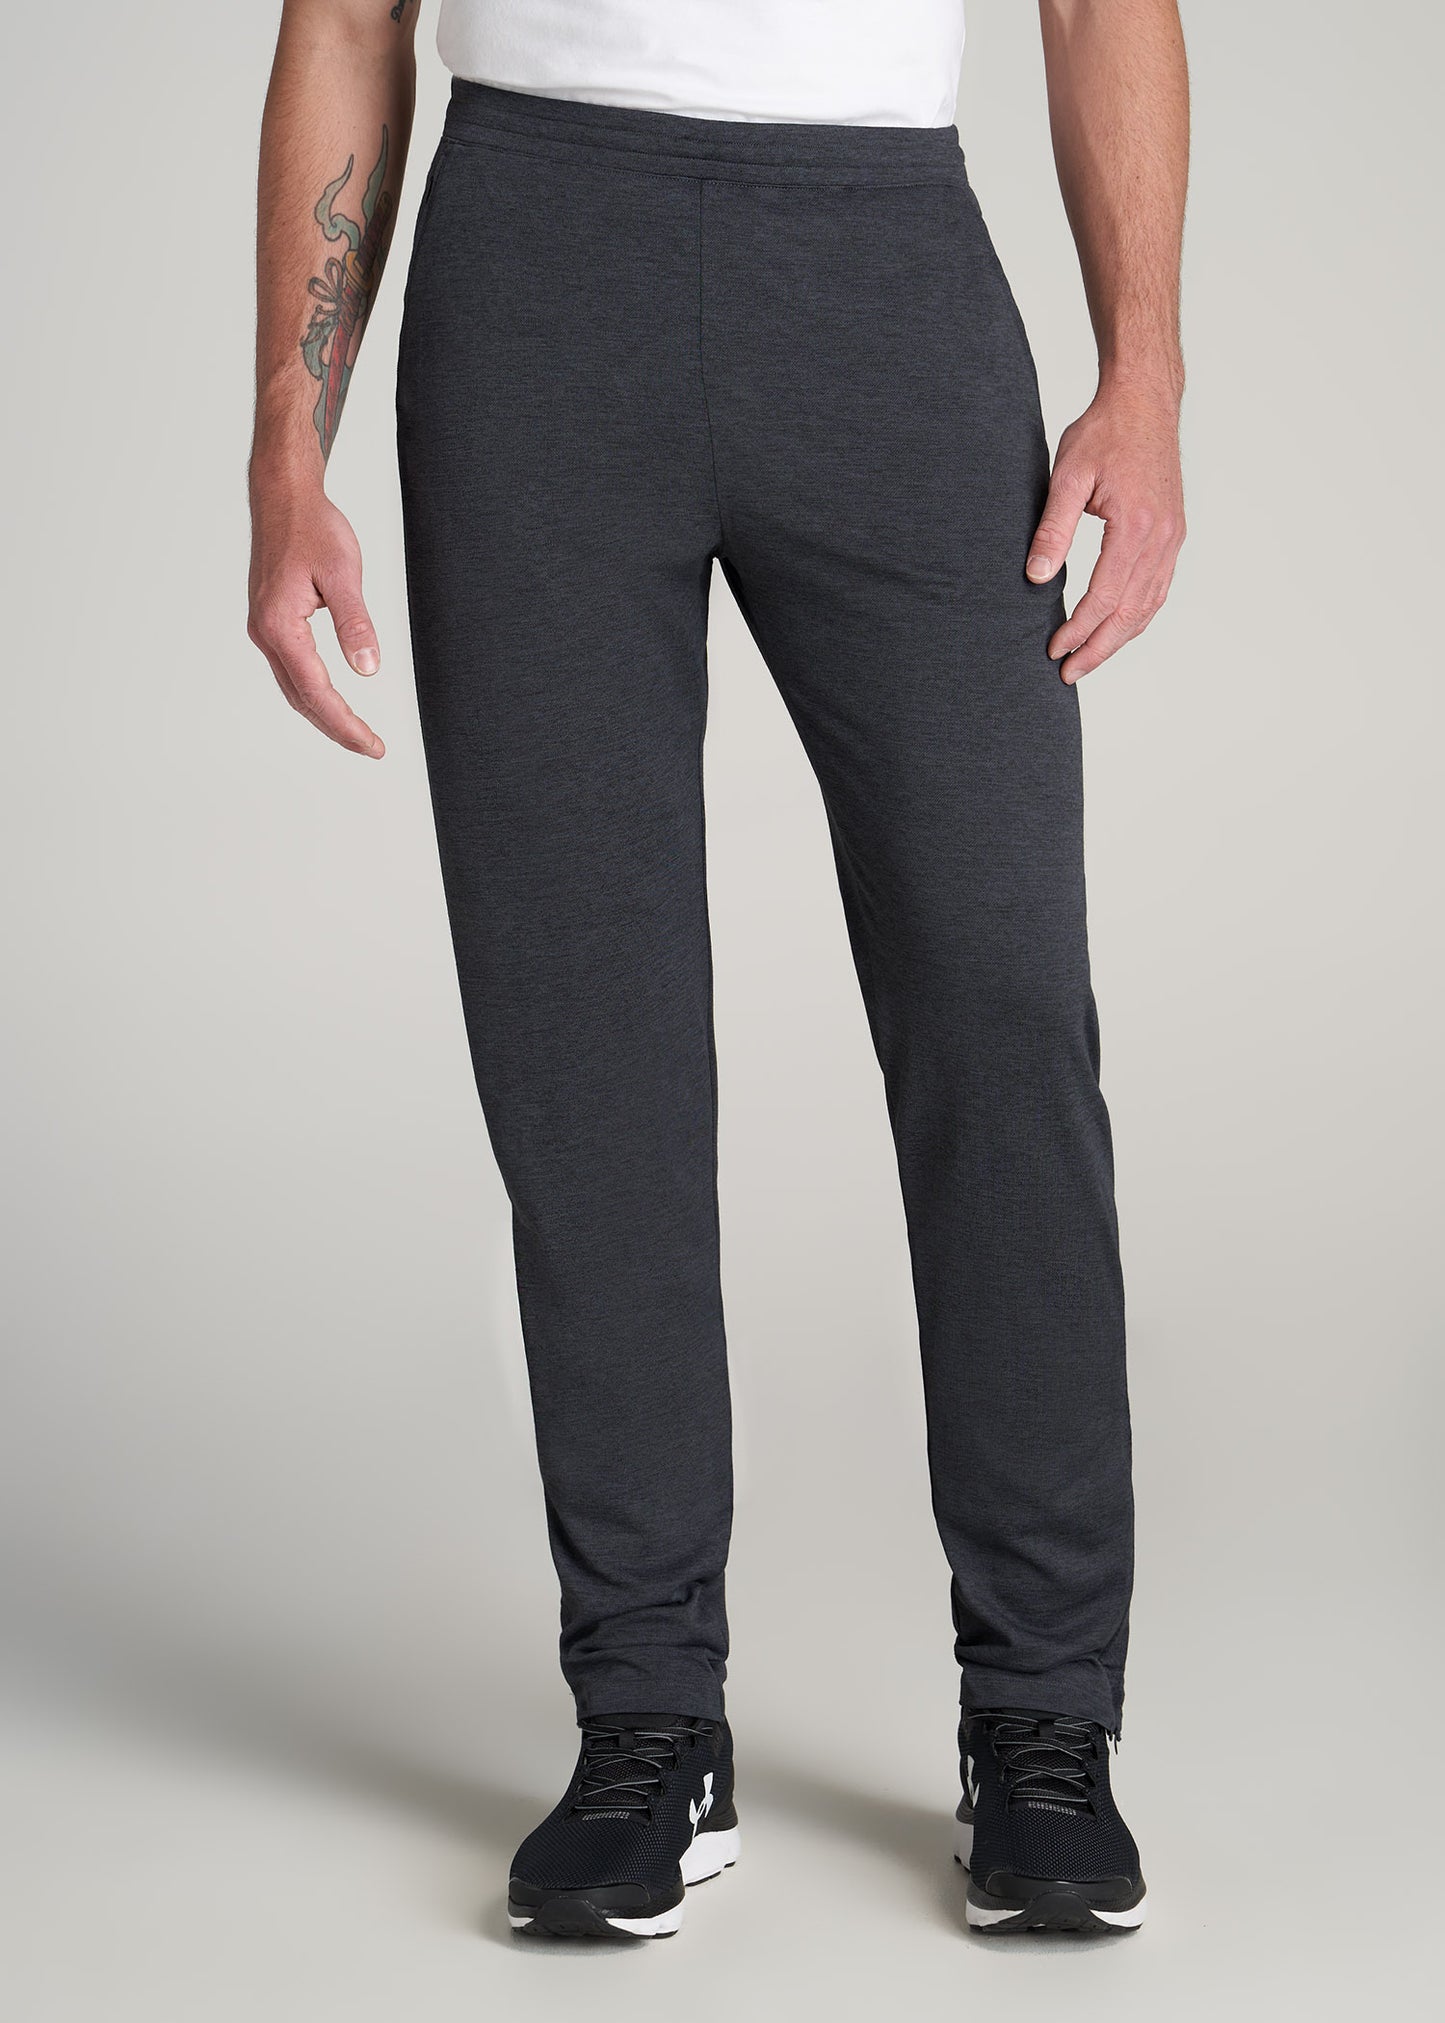     American-Tall-Men-Zip-Bottom-Performance-Pant-Charcoal-Mix-front